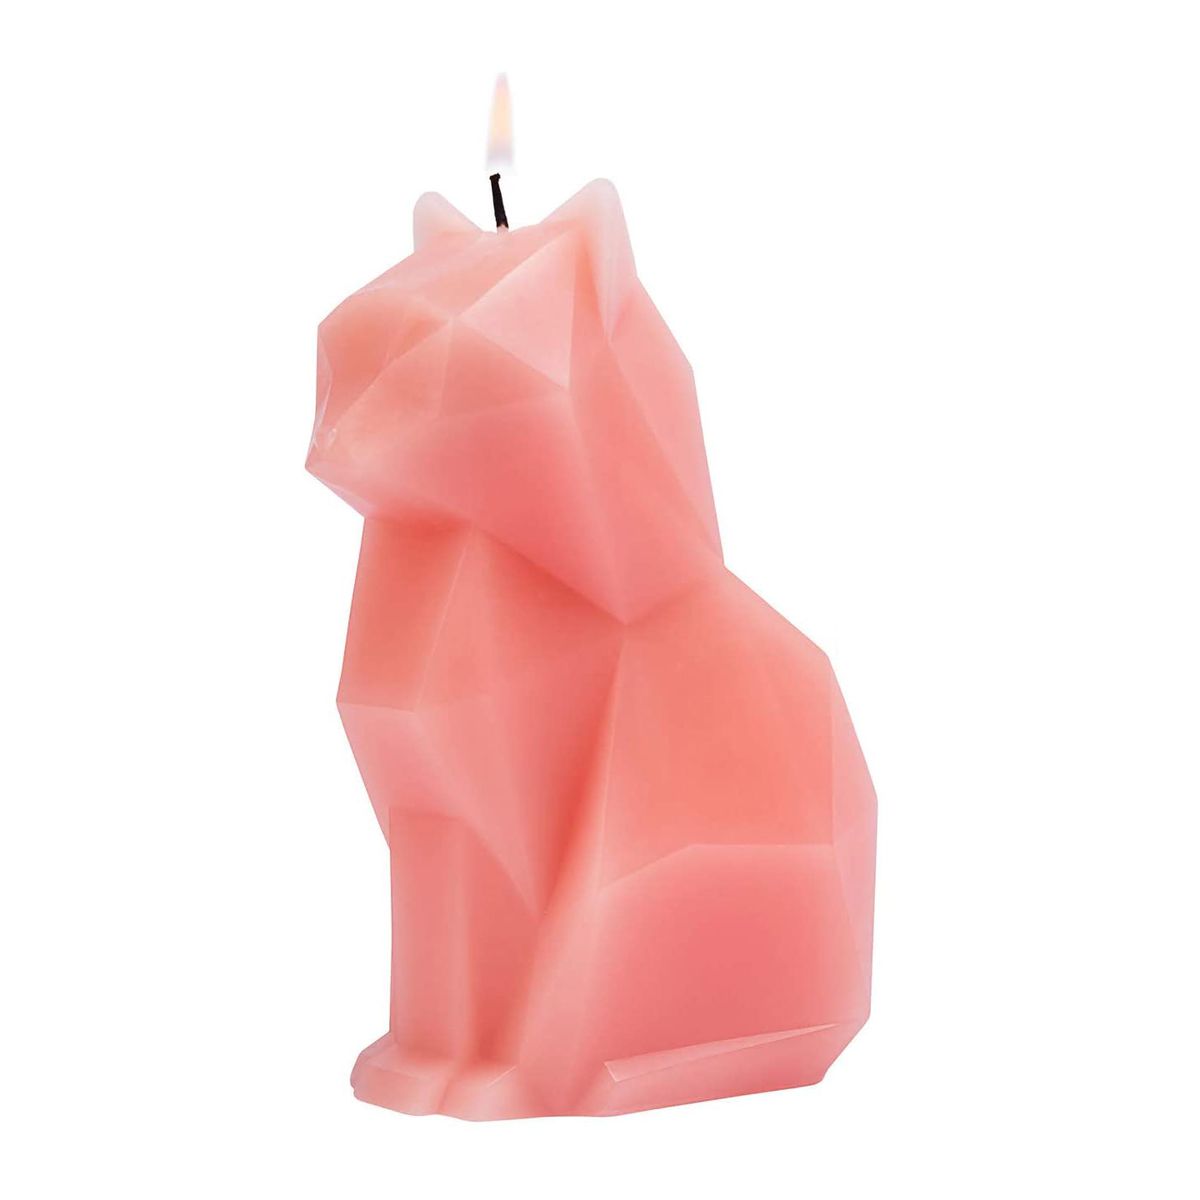 PyroPet Cat Candle